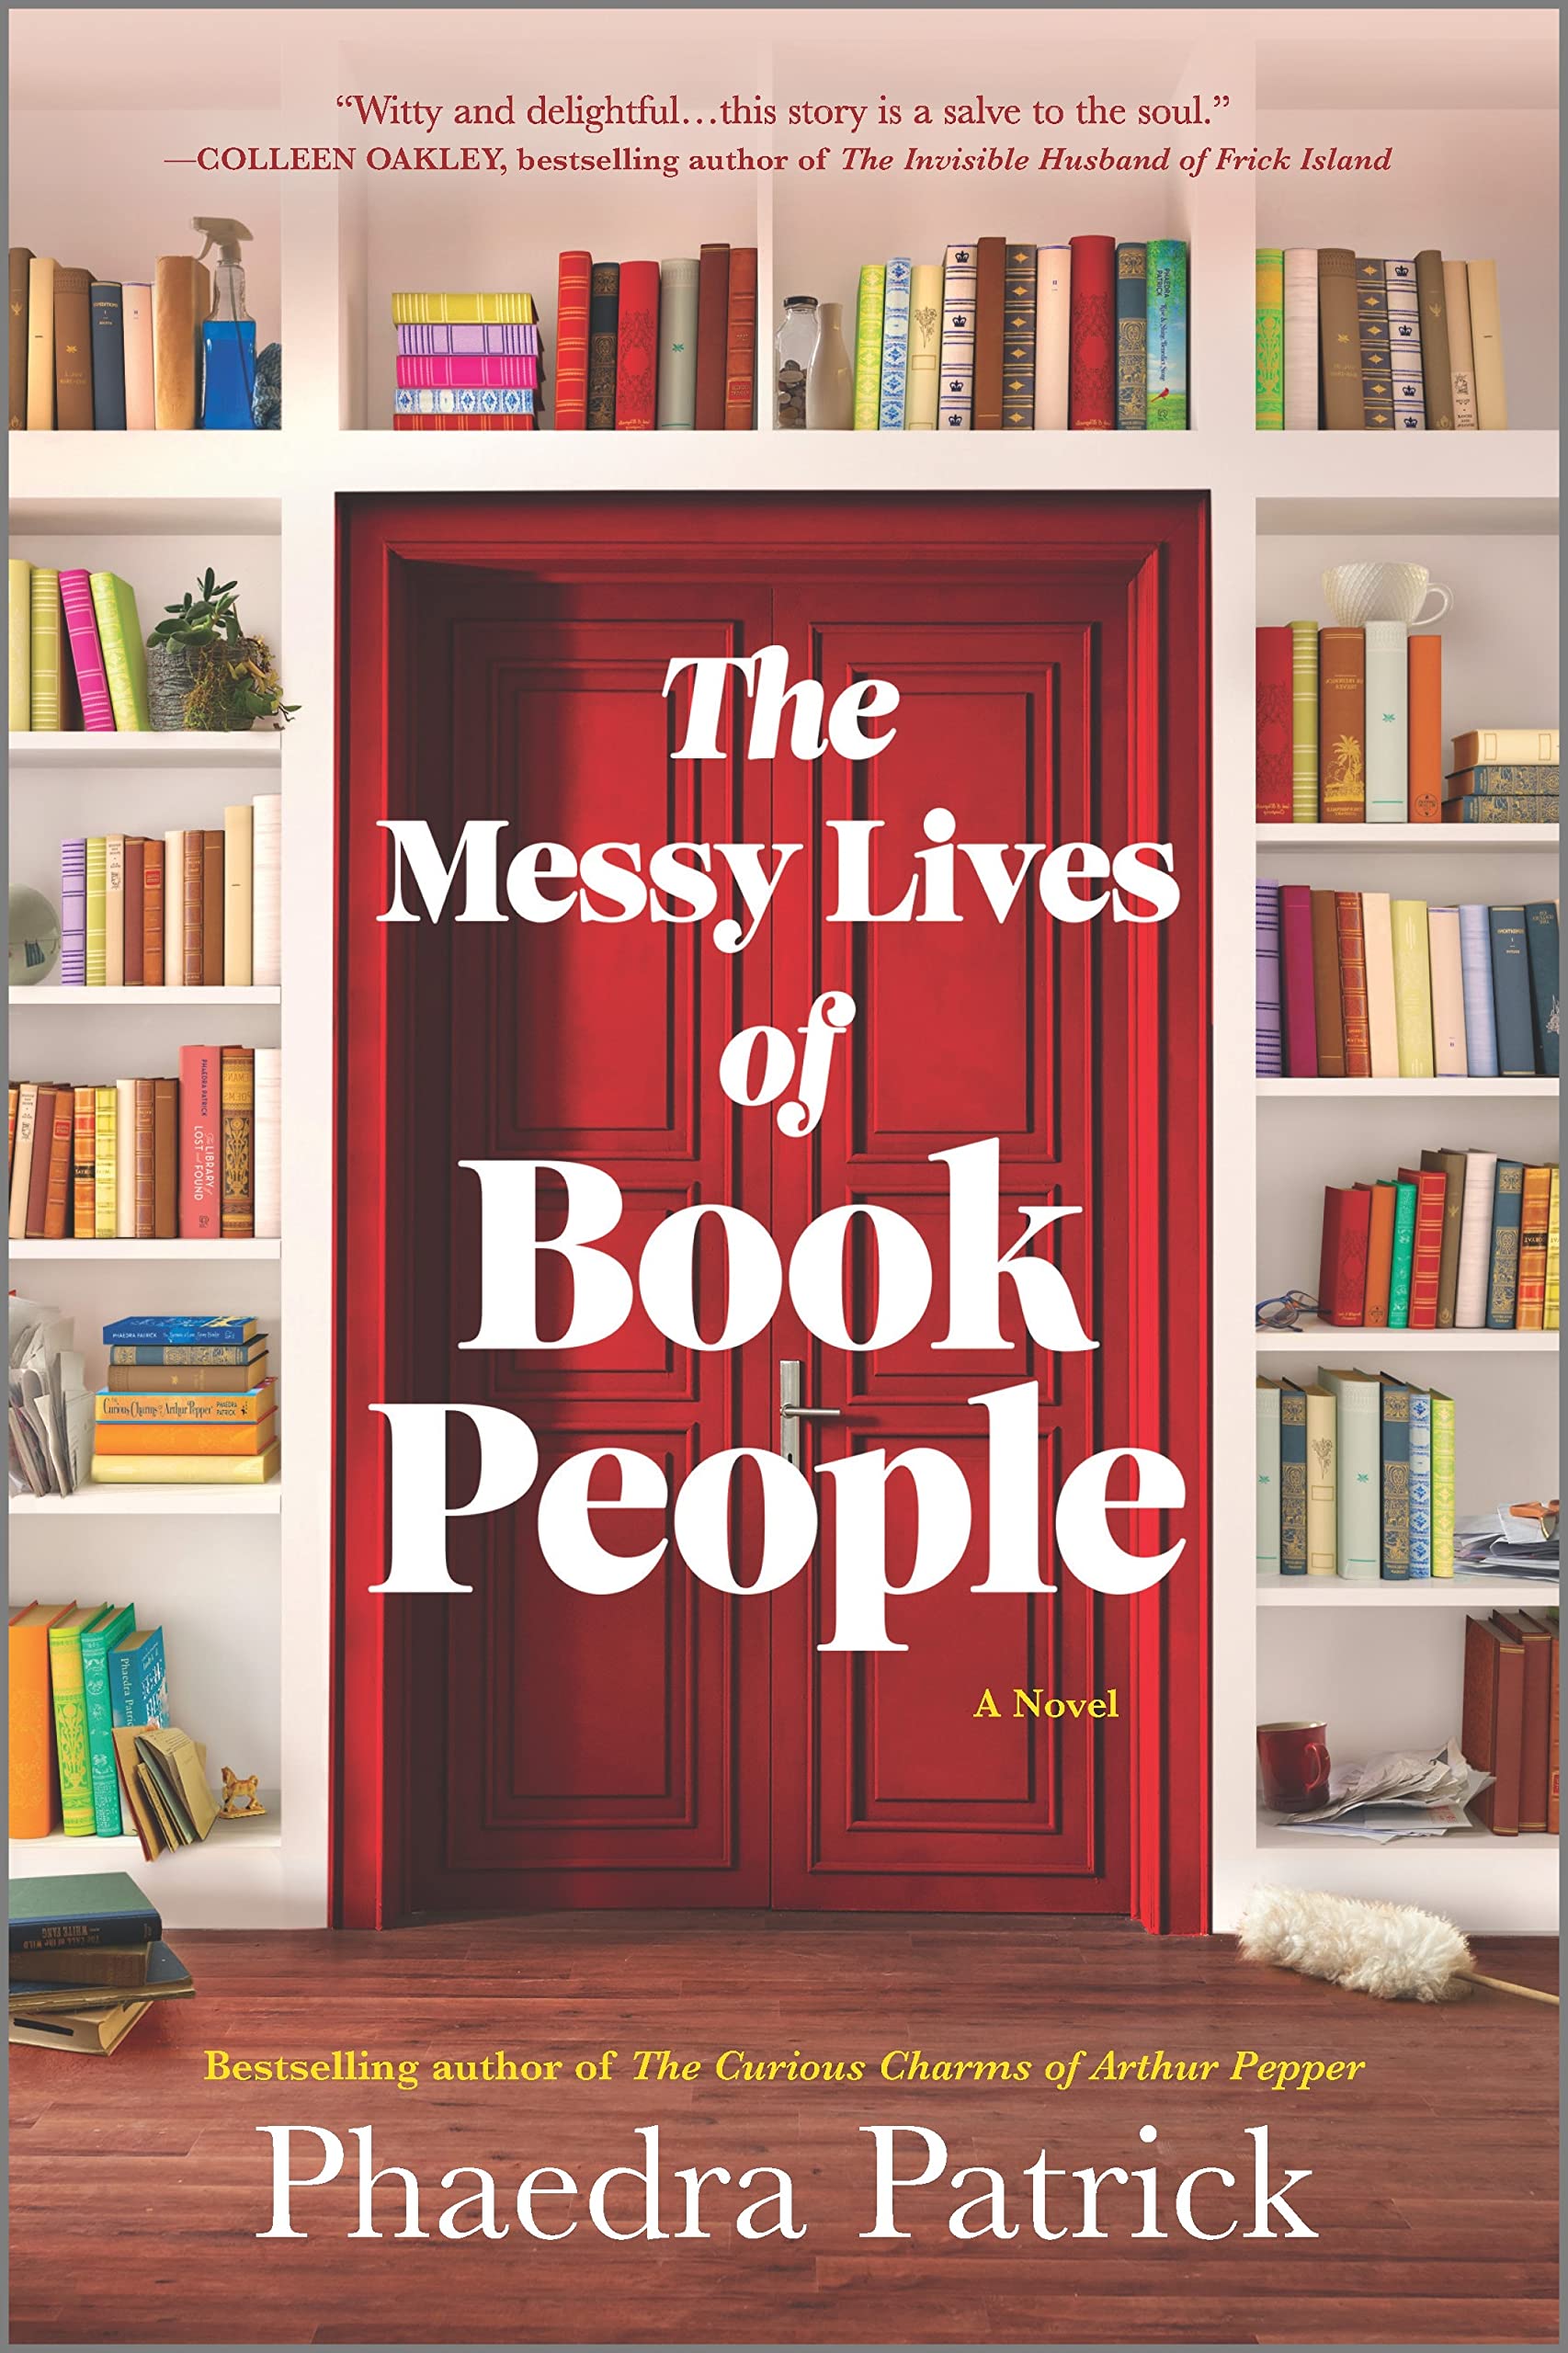 The Messy Lives of Book People | Seattle Book Review